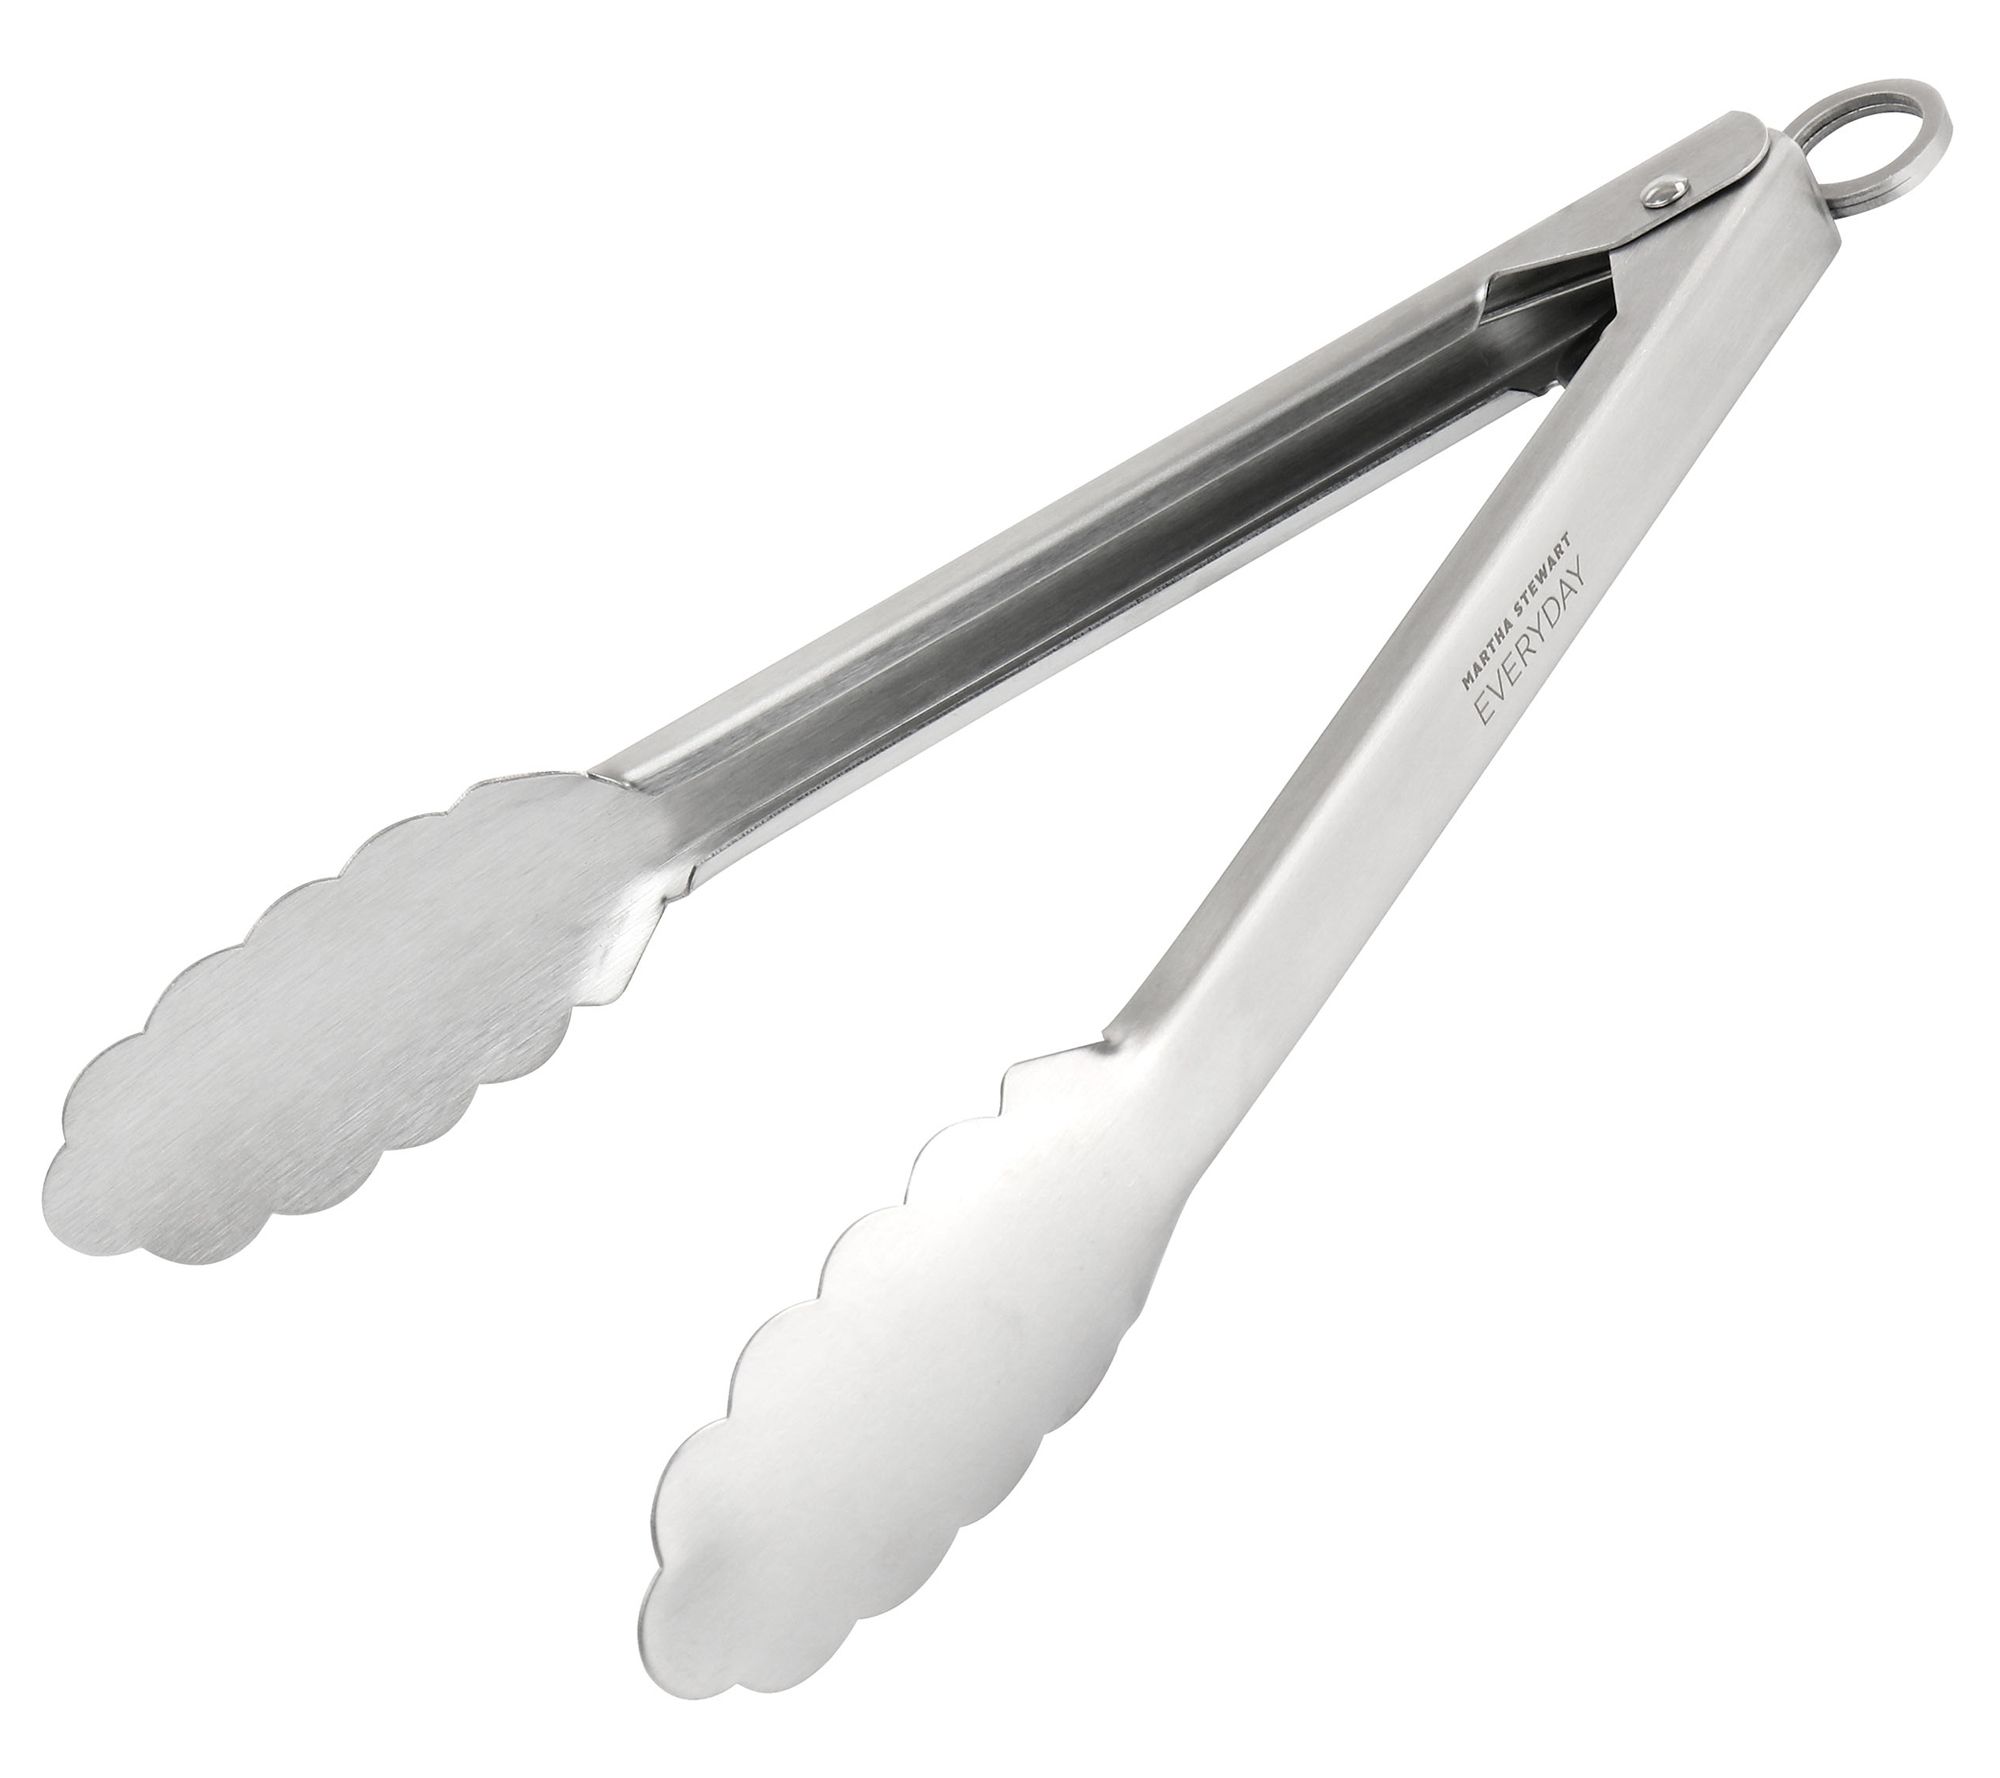 Starfrit Silicone Tongs